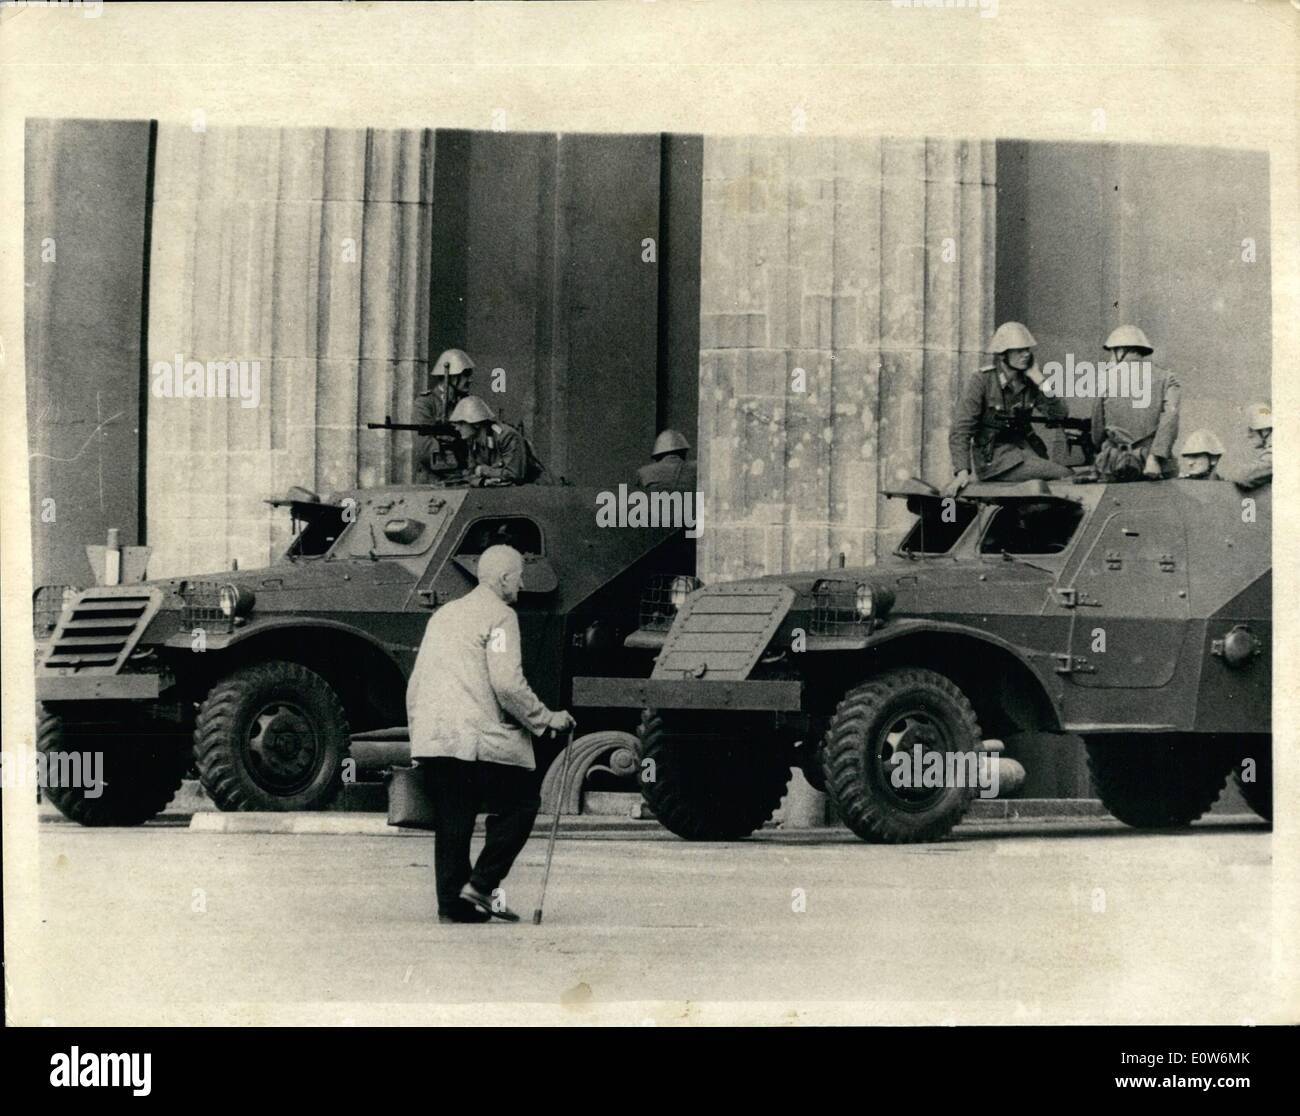 Aug. 08, 1961 - ''They shall not pass '' . Not even old men armored scout cars at Brandenburg gate bar way to old man wanting to be to east Berlin this old west Berliner hobbled his way, helped by a cane, up to the Brandenburg gate yesterday only to be turned back by armed East German police and troops, sealing the border. The man, too old to understand why international situations should stop him from traveling freely in his city, argued, but to no avail. he was forced to return home. Stock Photo